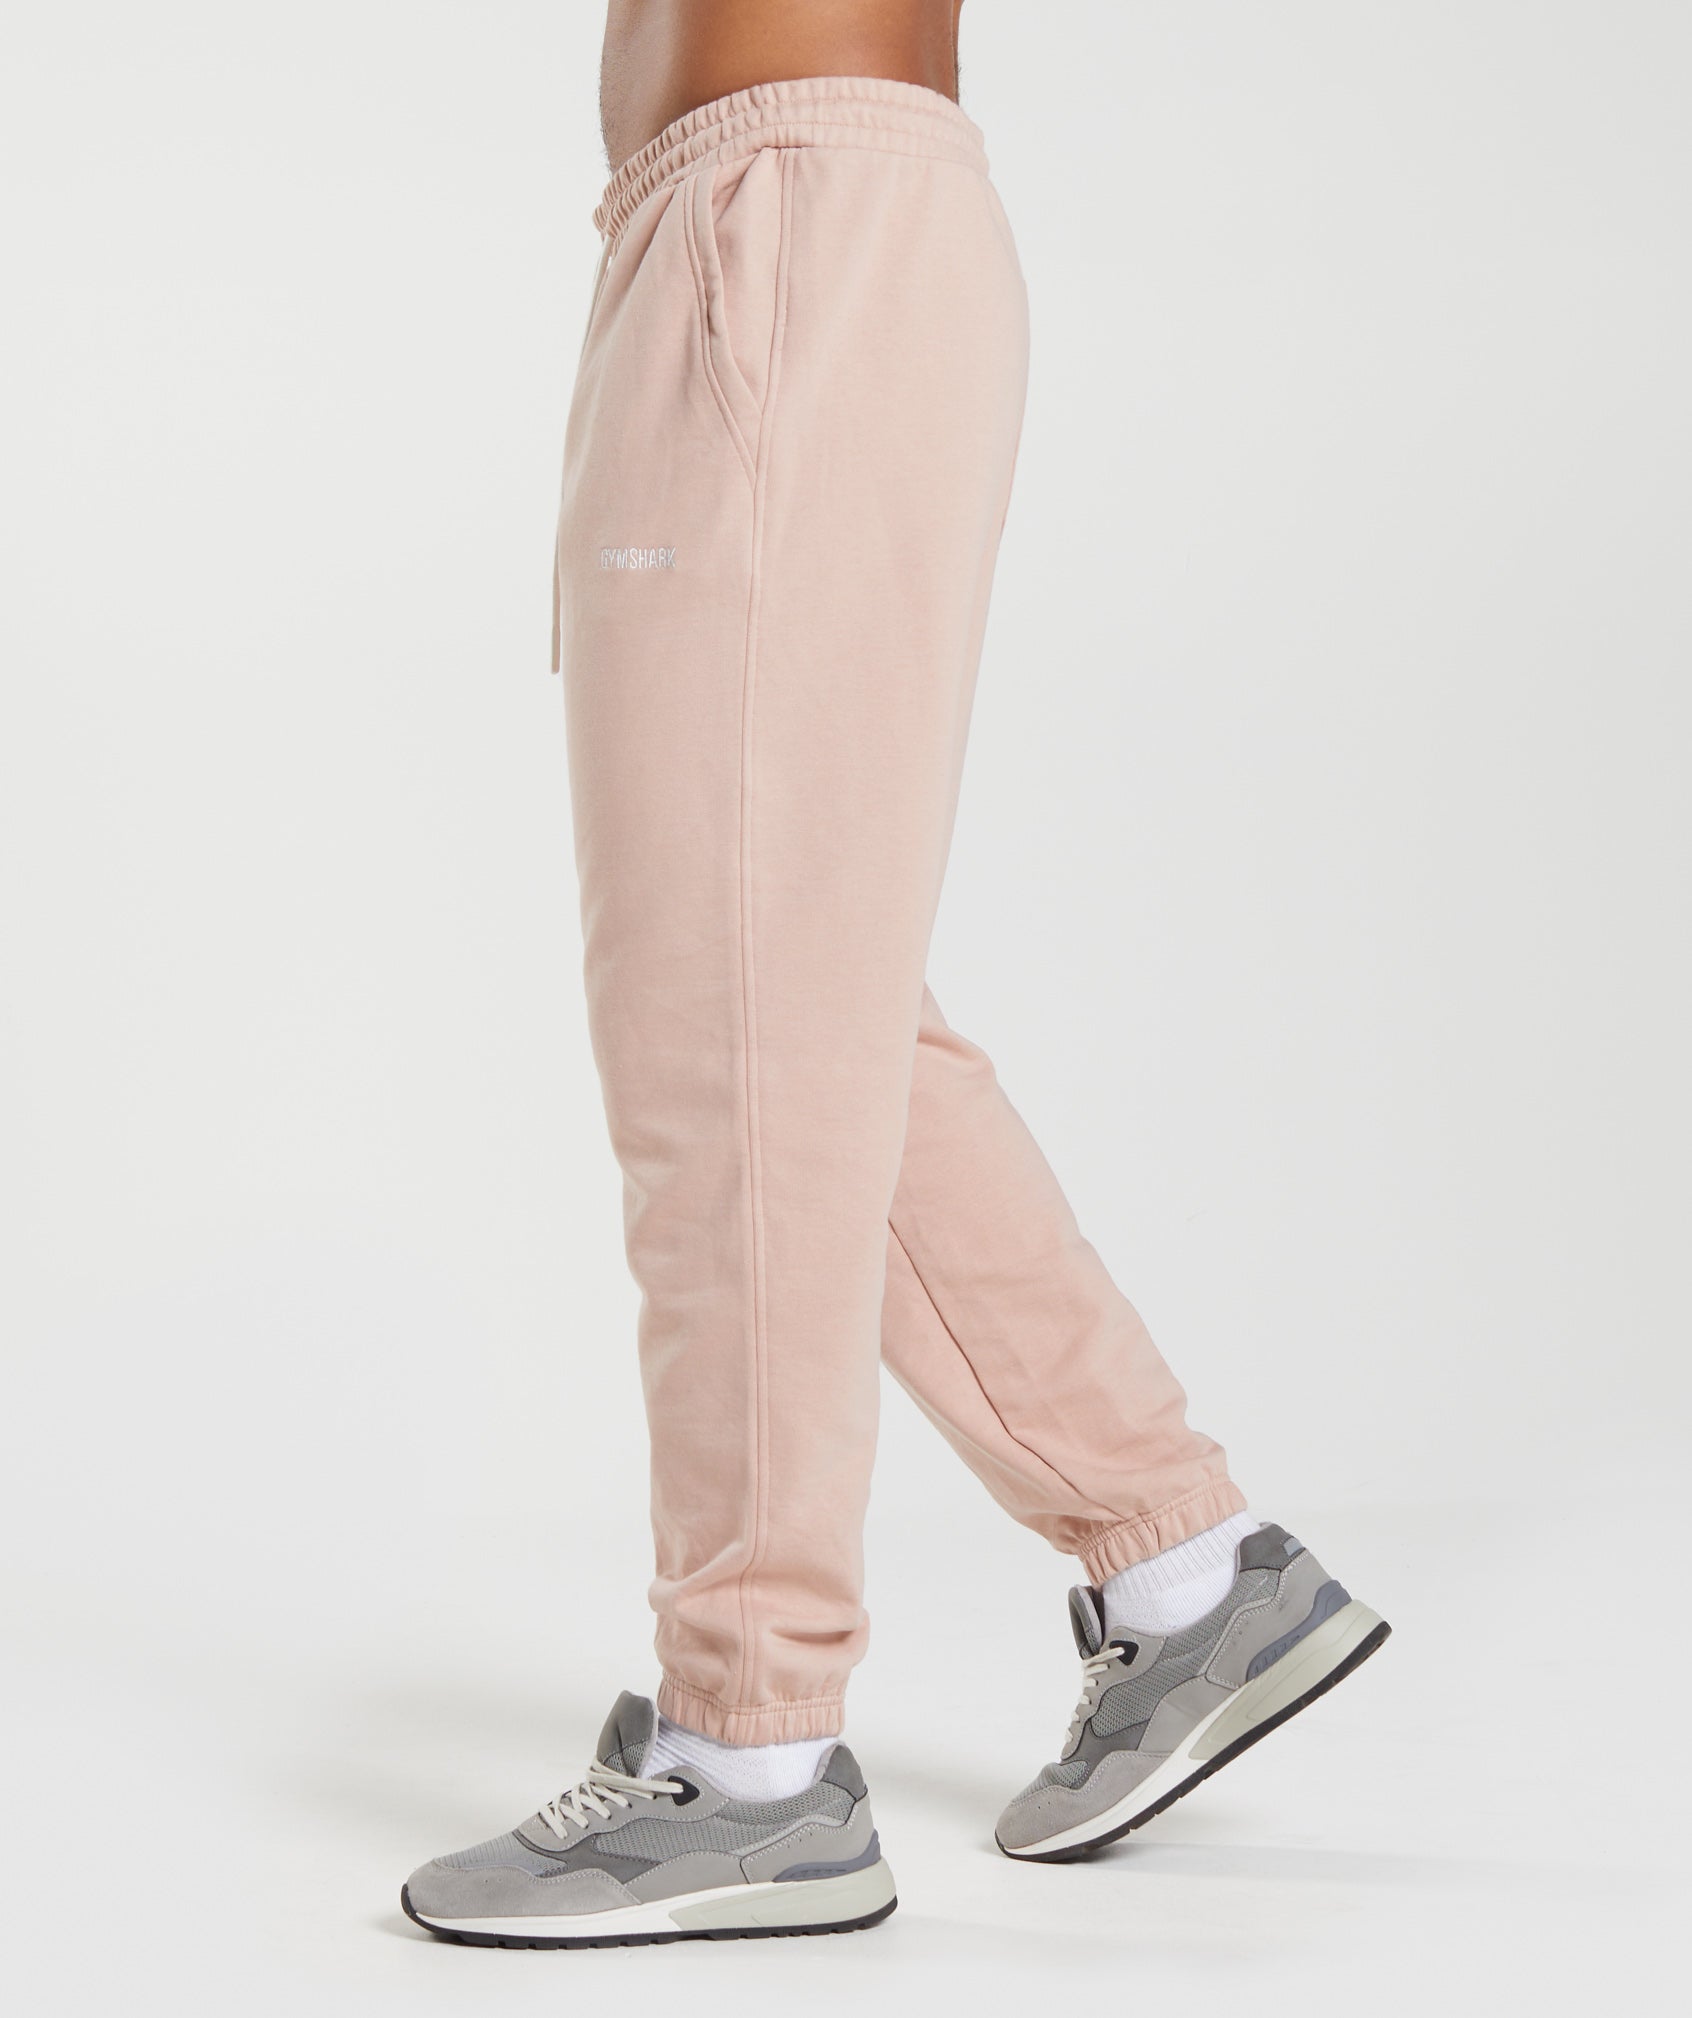 Rest Day Sweats Joggers in Dusty Taupe - view 6